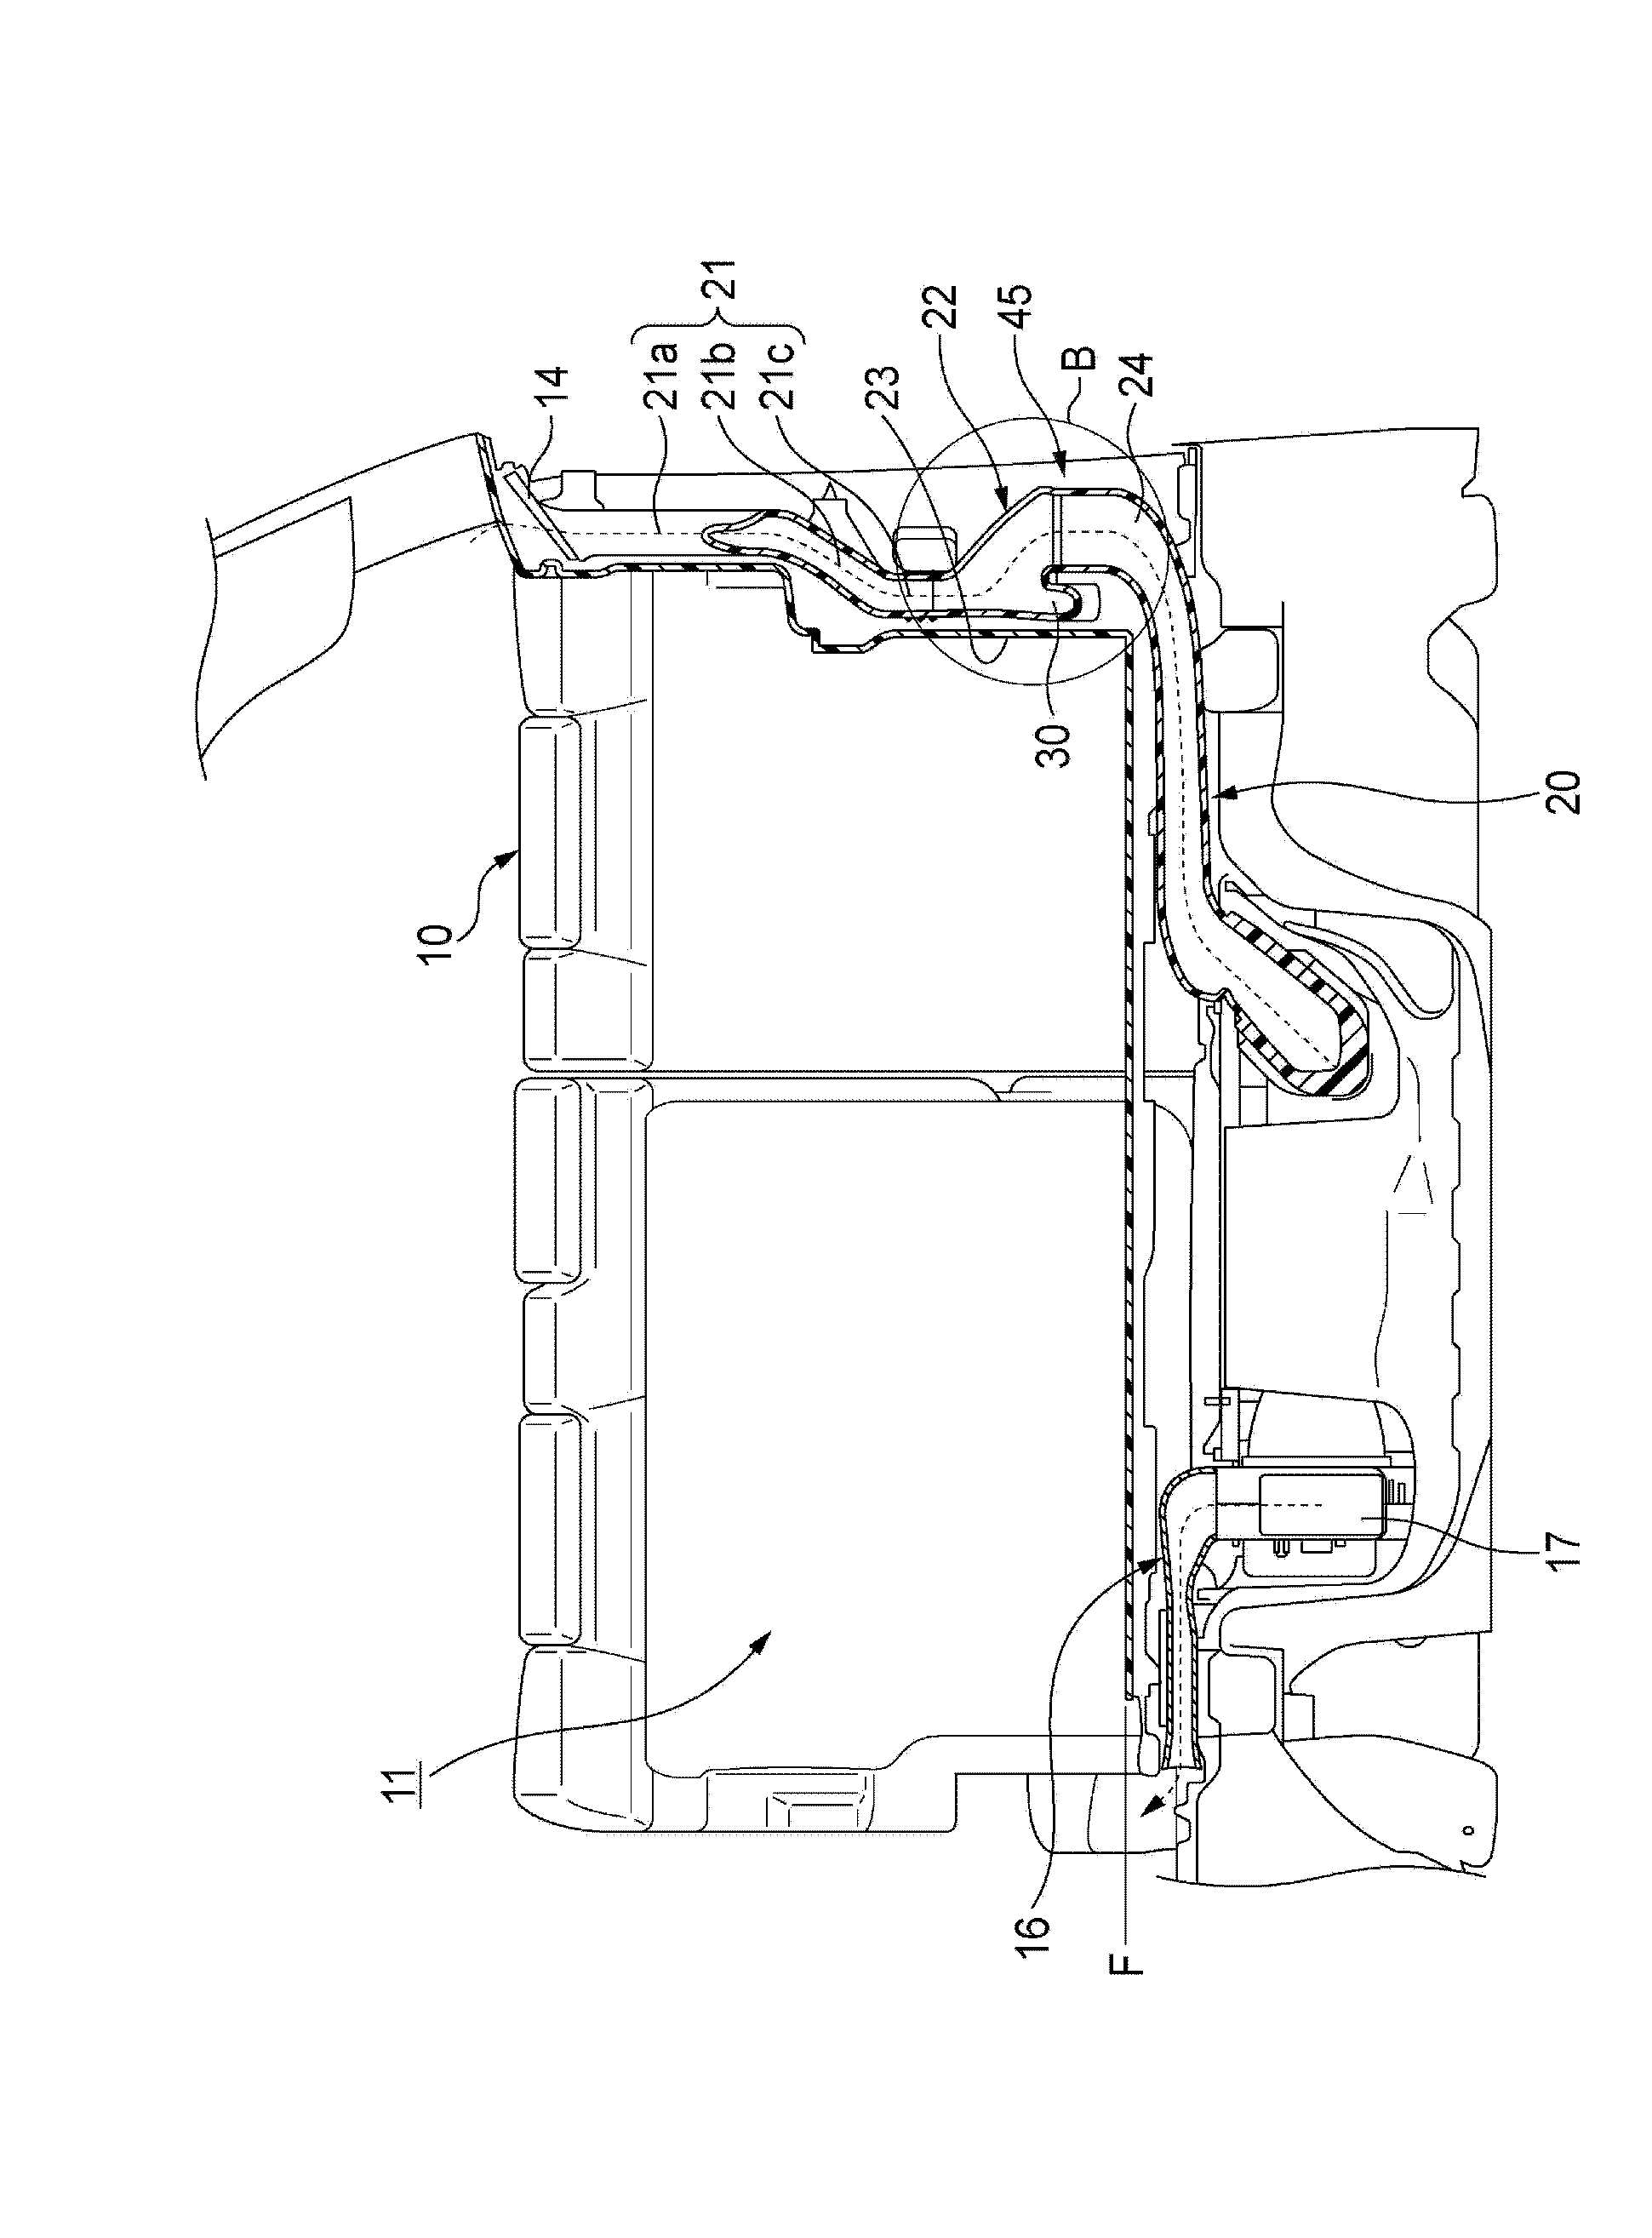 Cooling structure of battery used for vehicle